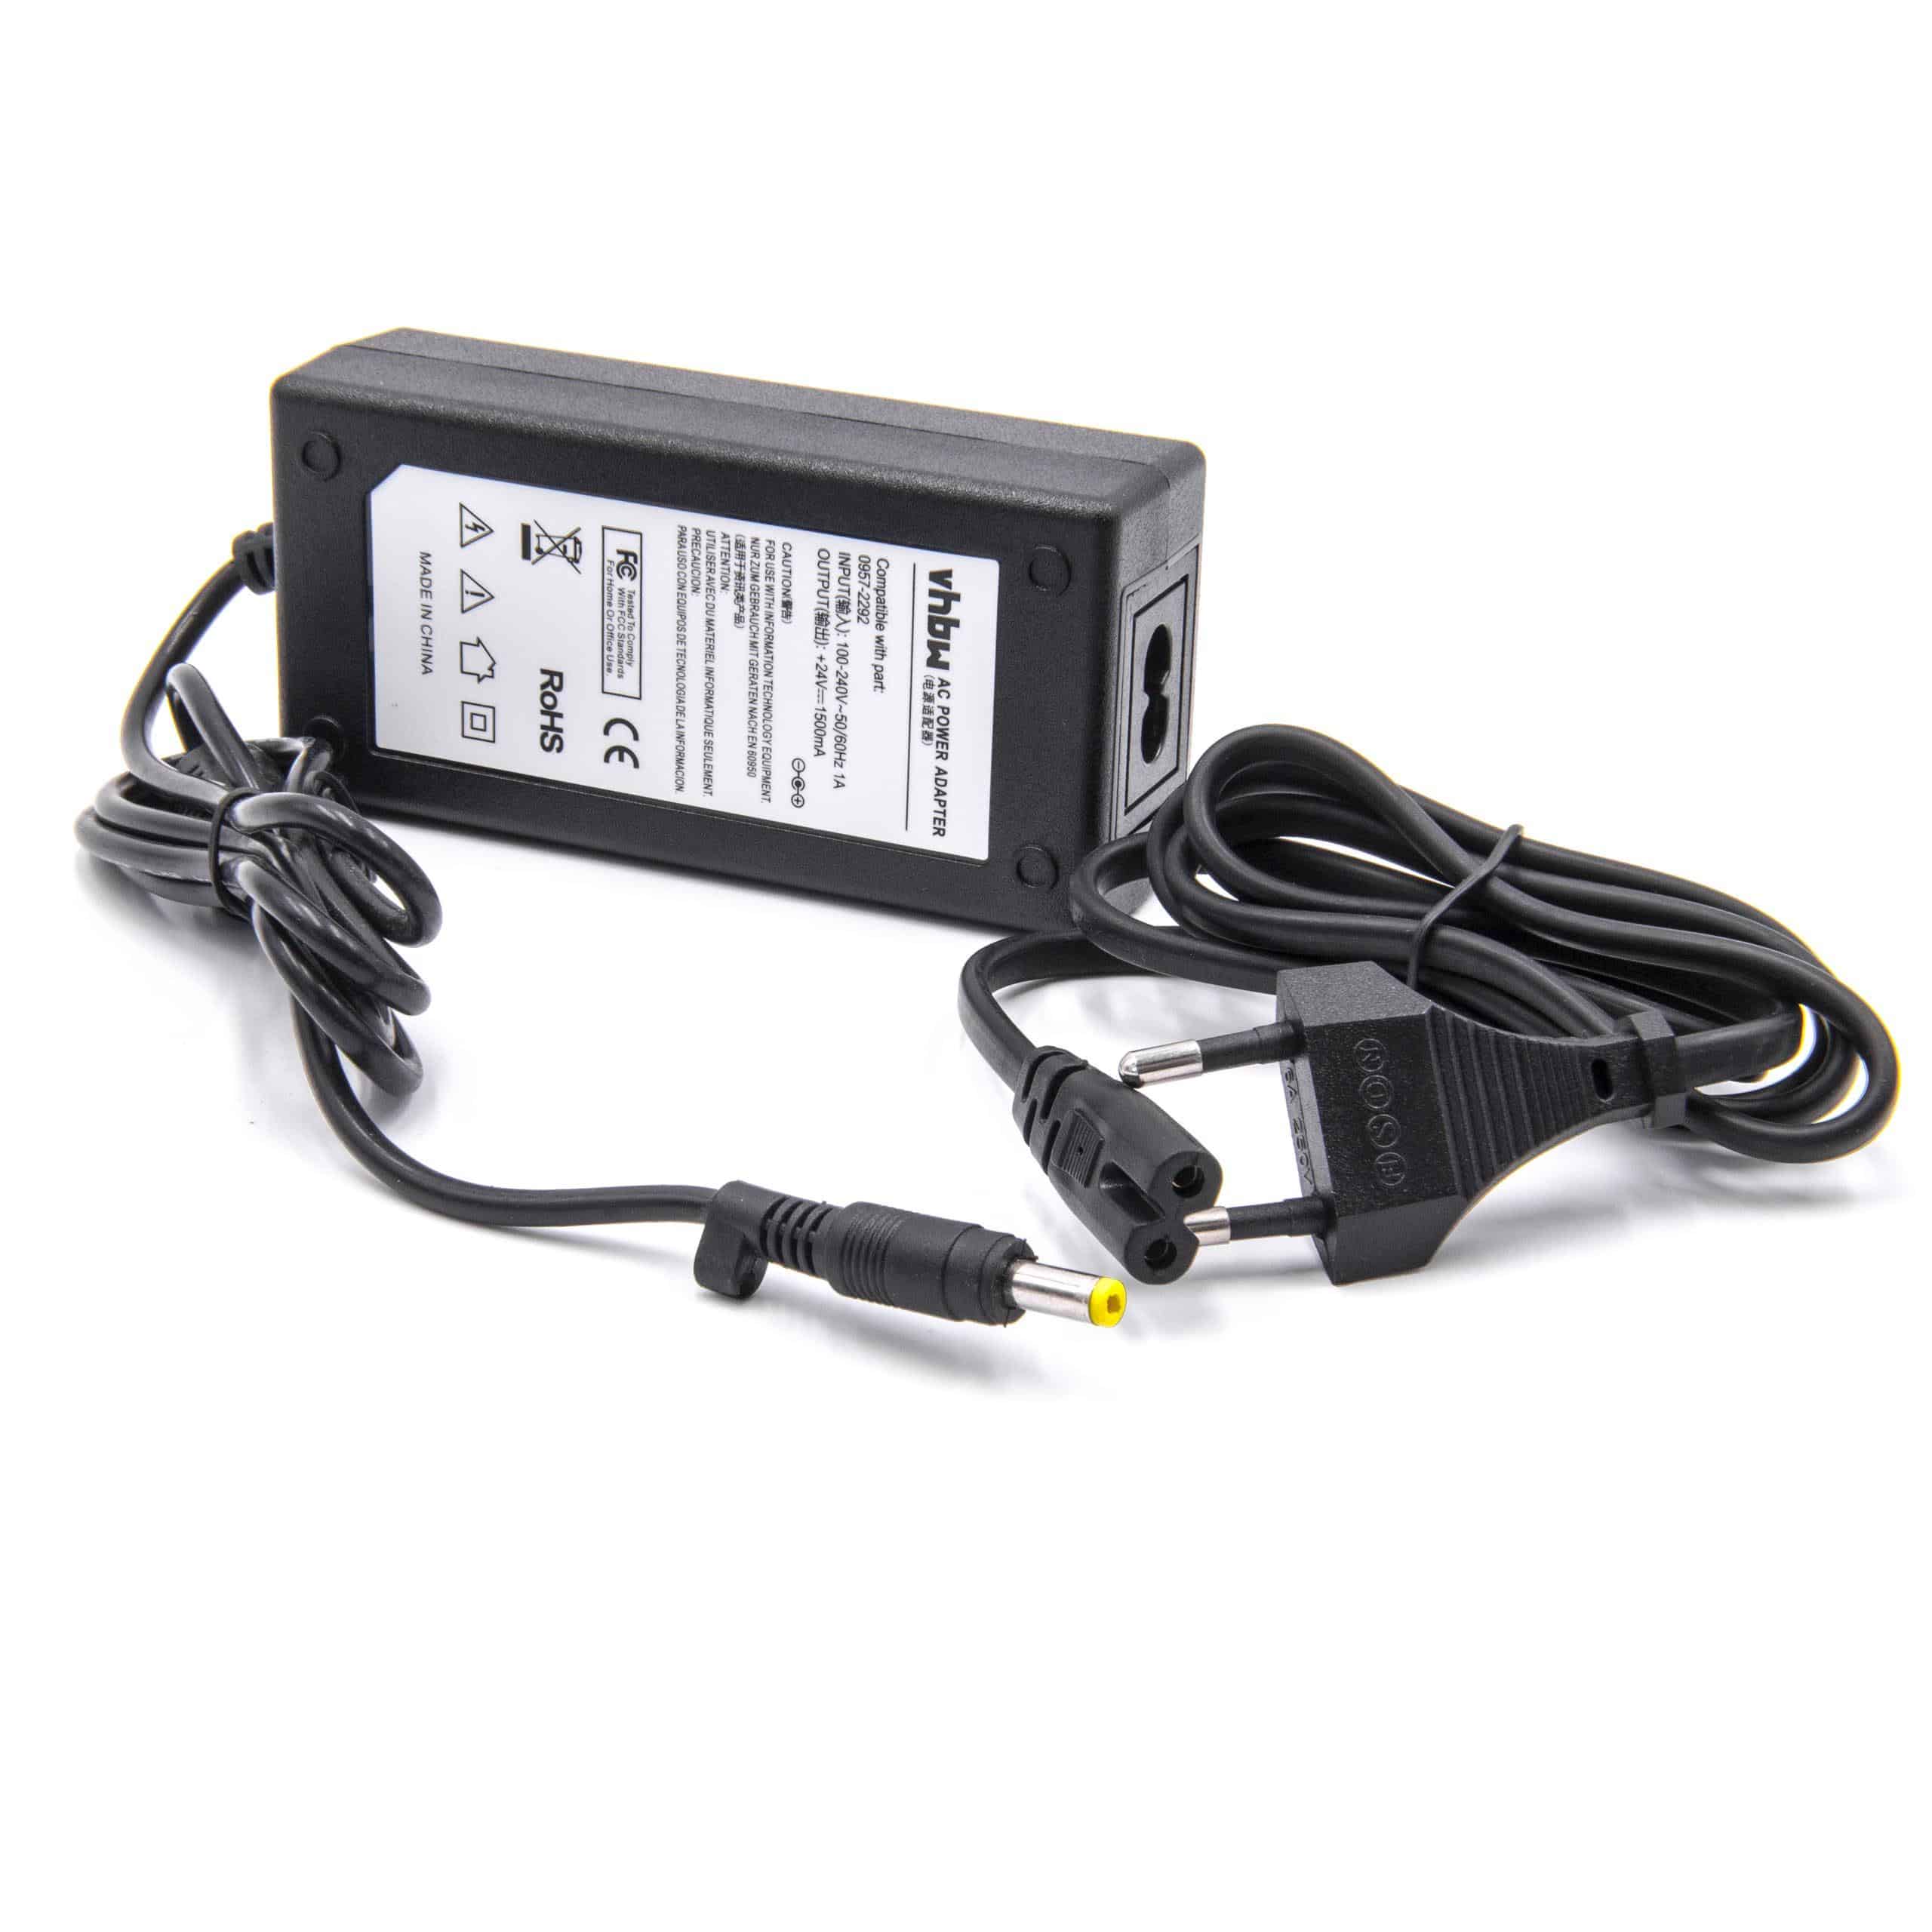 Mains Power Adapter replaces HP 0957-2292 for HP Scanner